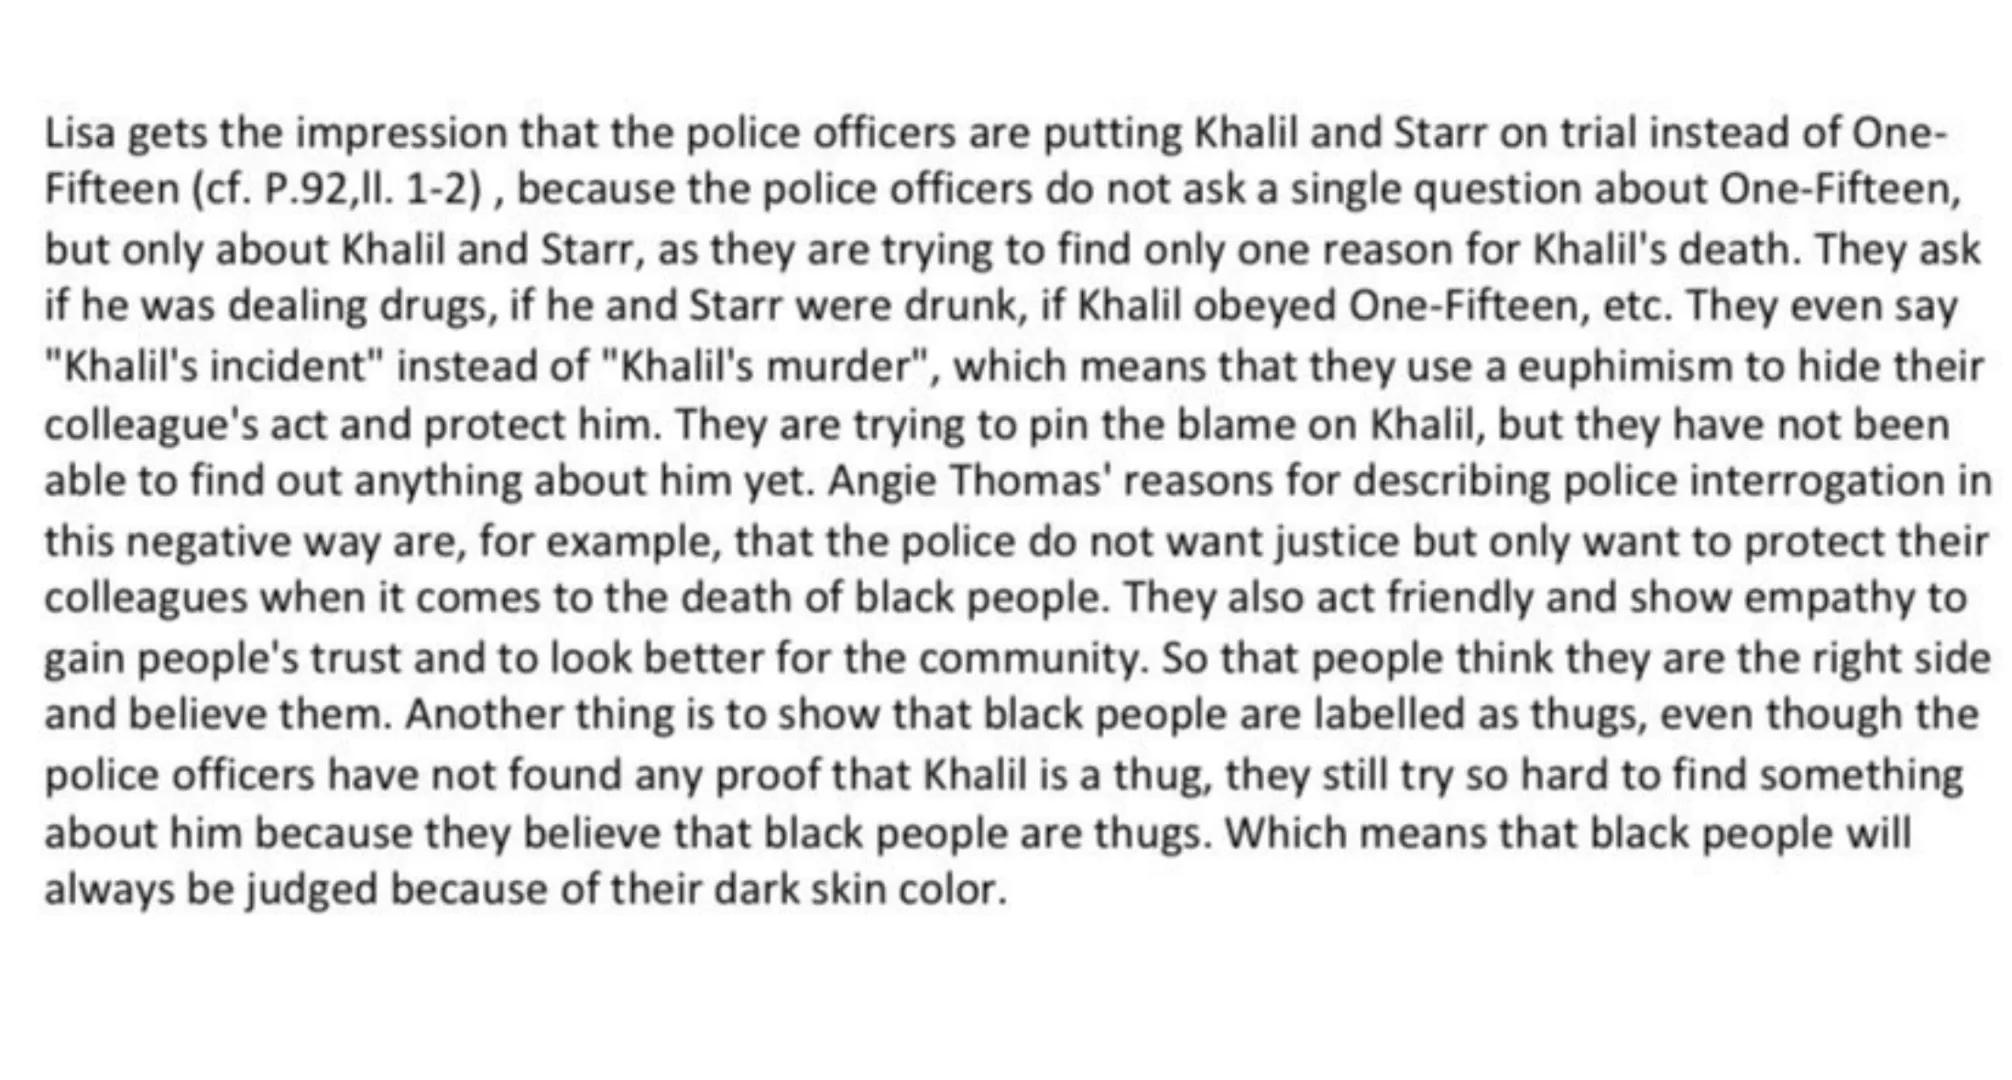 2: Police officers
(defectives)
hisa
5: Starr
Are y'all putting Khalil and Starr on trial
or the cop who killed him?
(p. 92, ll. 1-2)
1 Summ